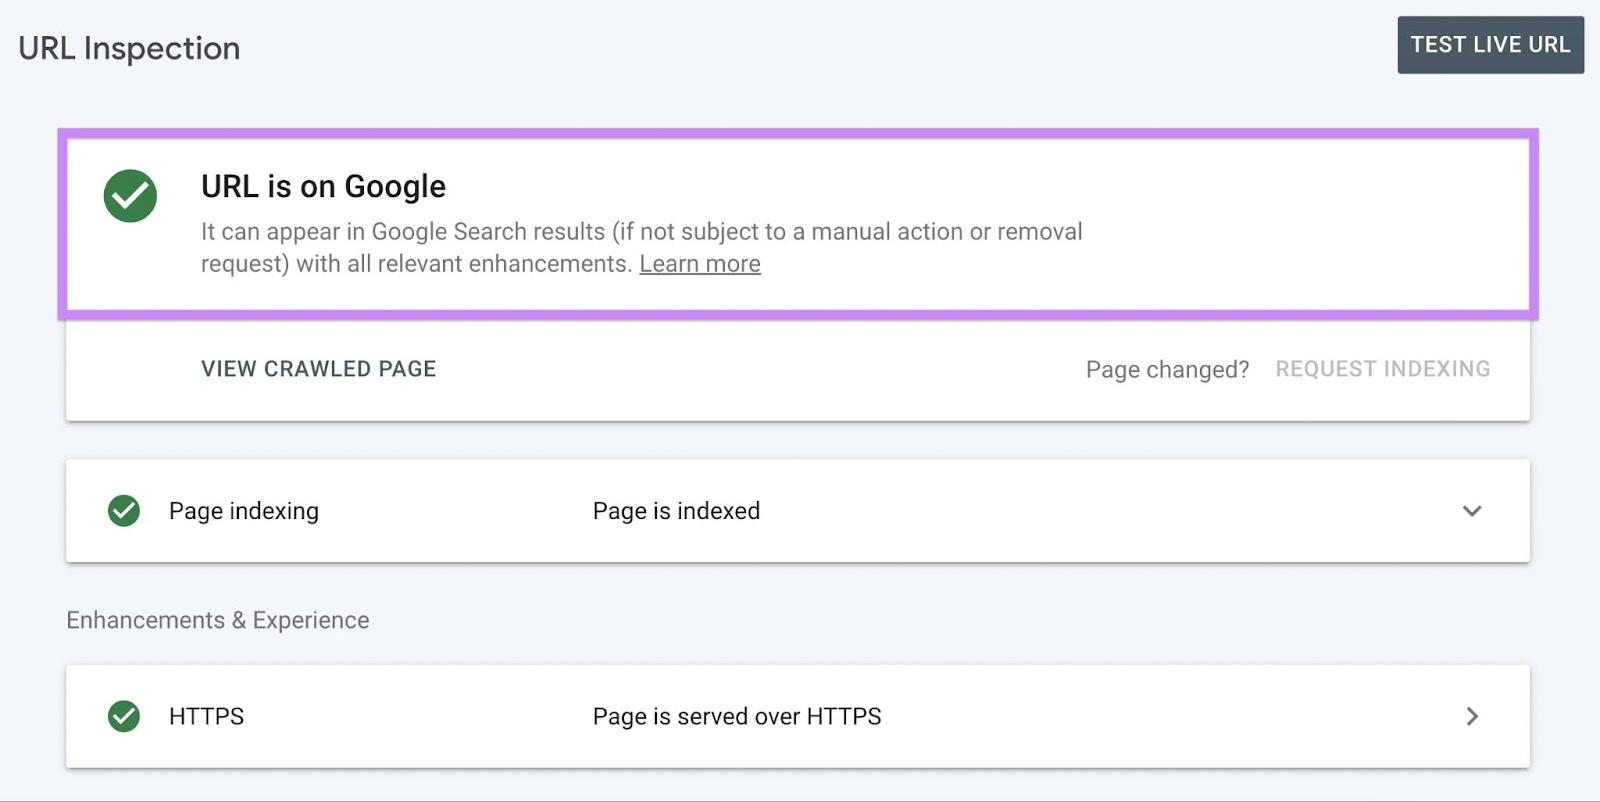 "URL is connected  Google" connection   successful  URL Inspection Tool